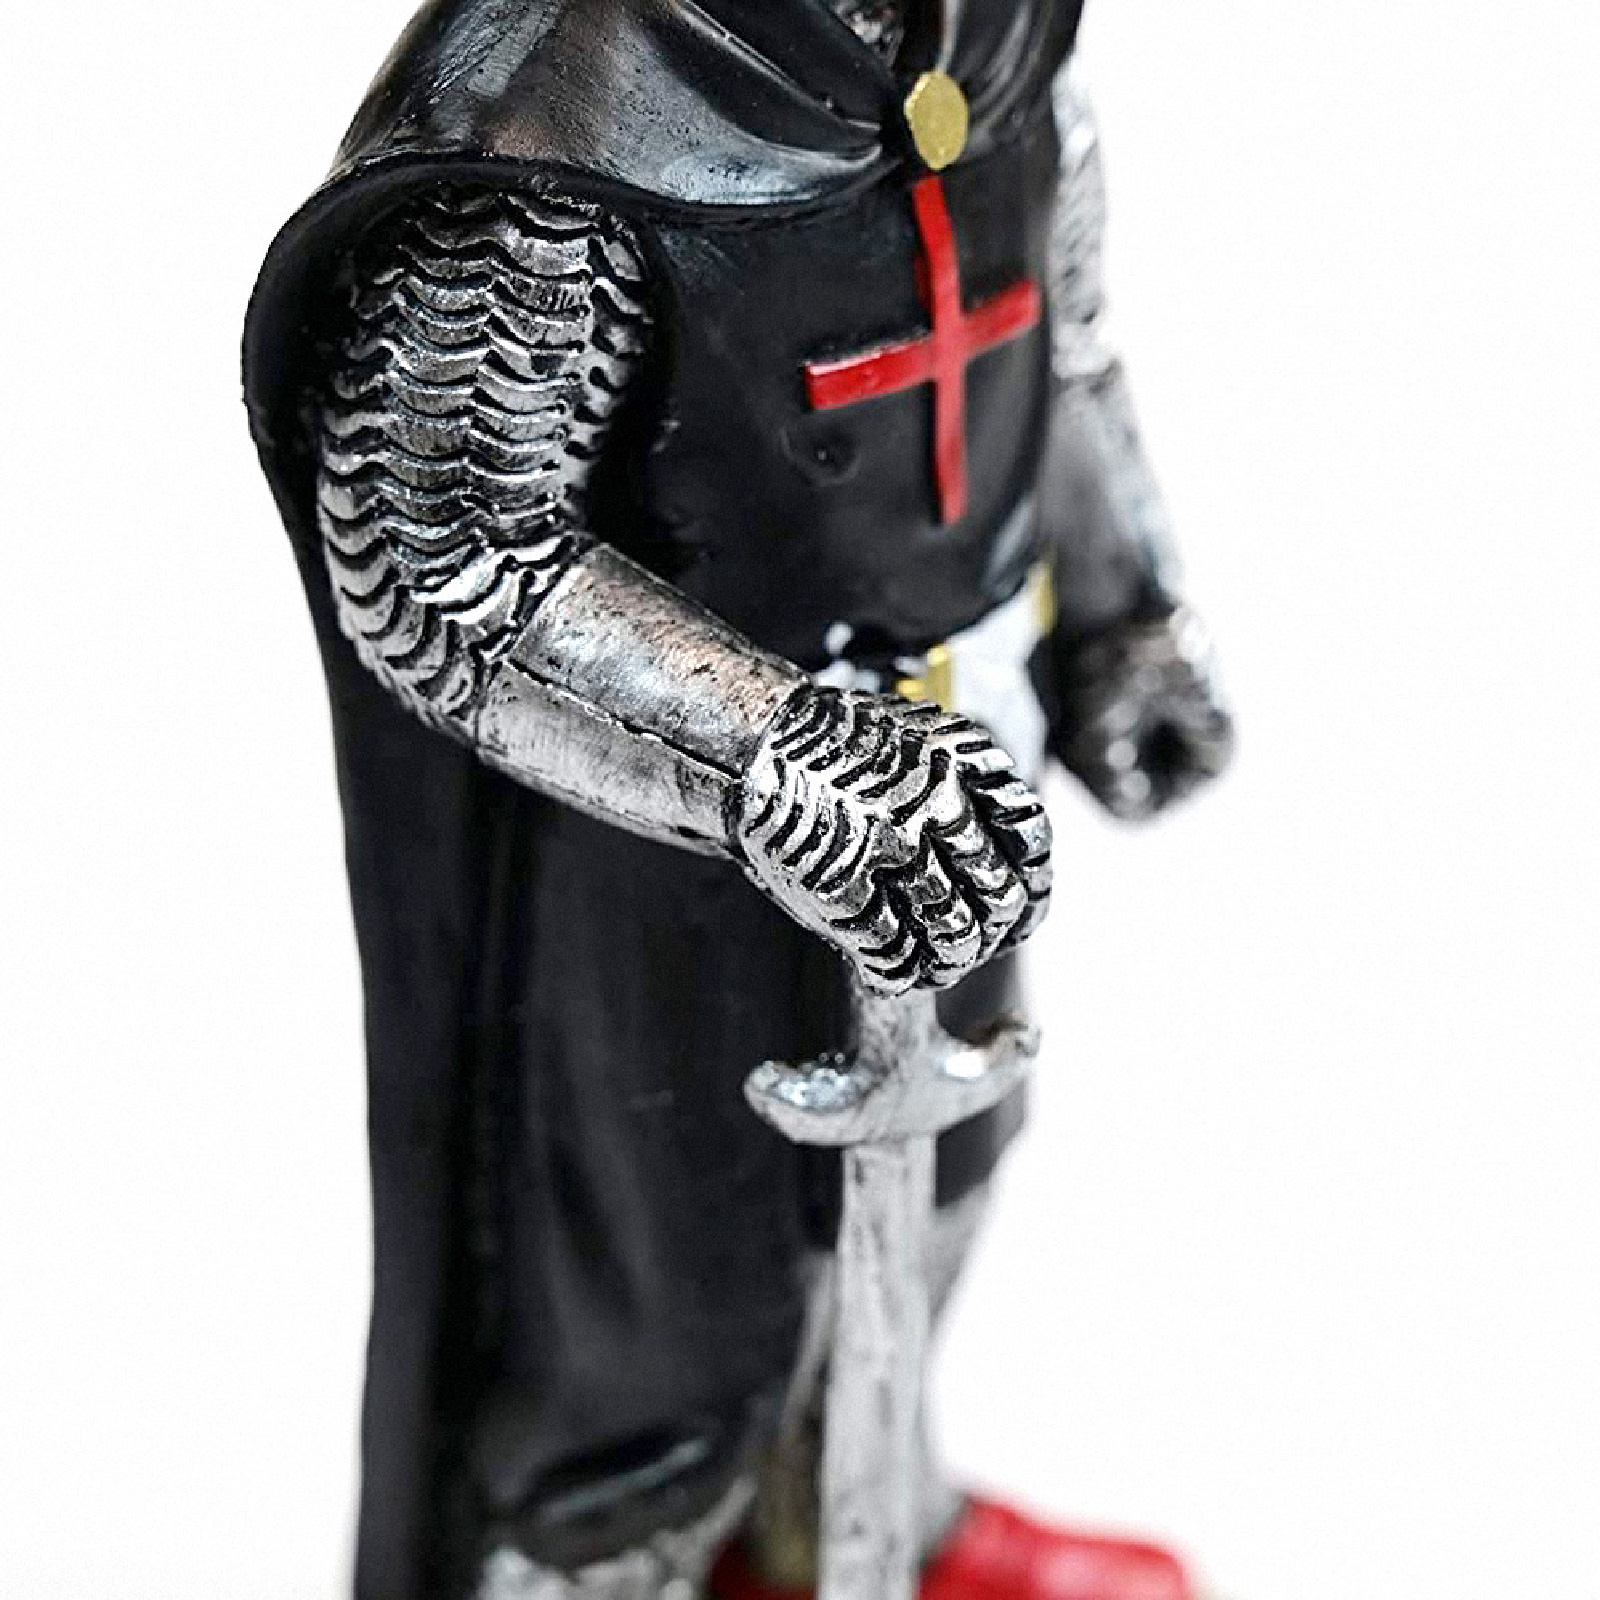 Miniature Knight made of resin